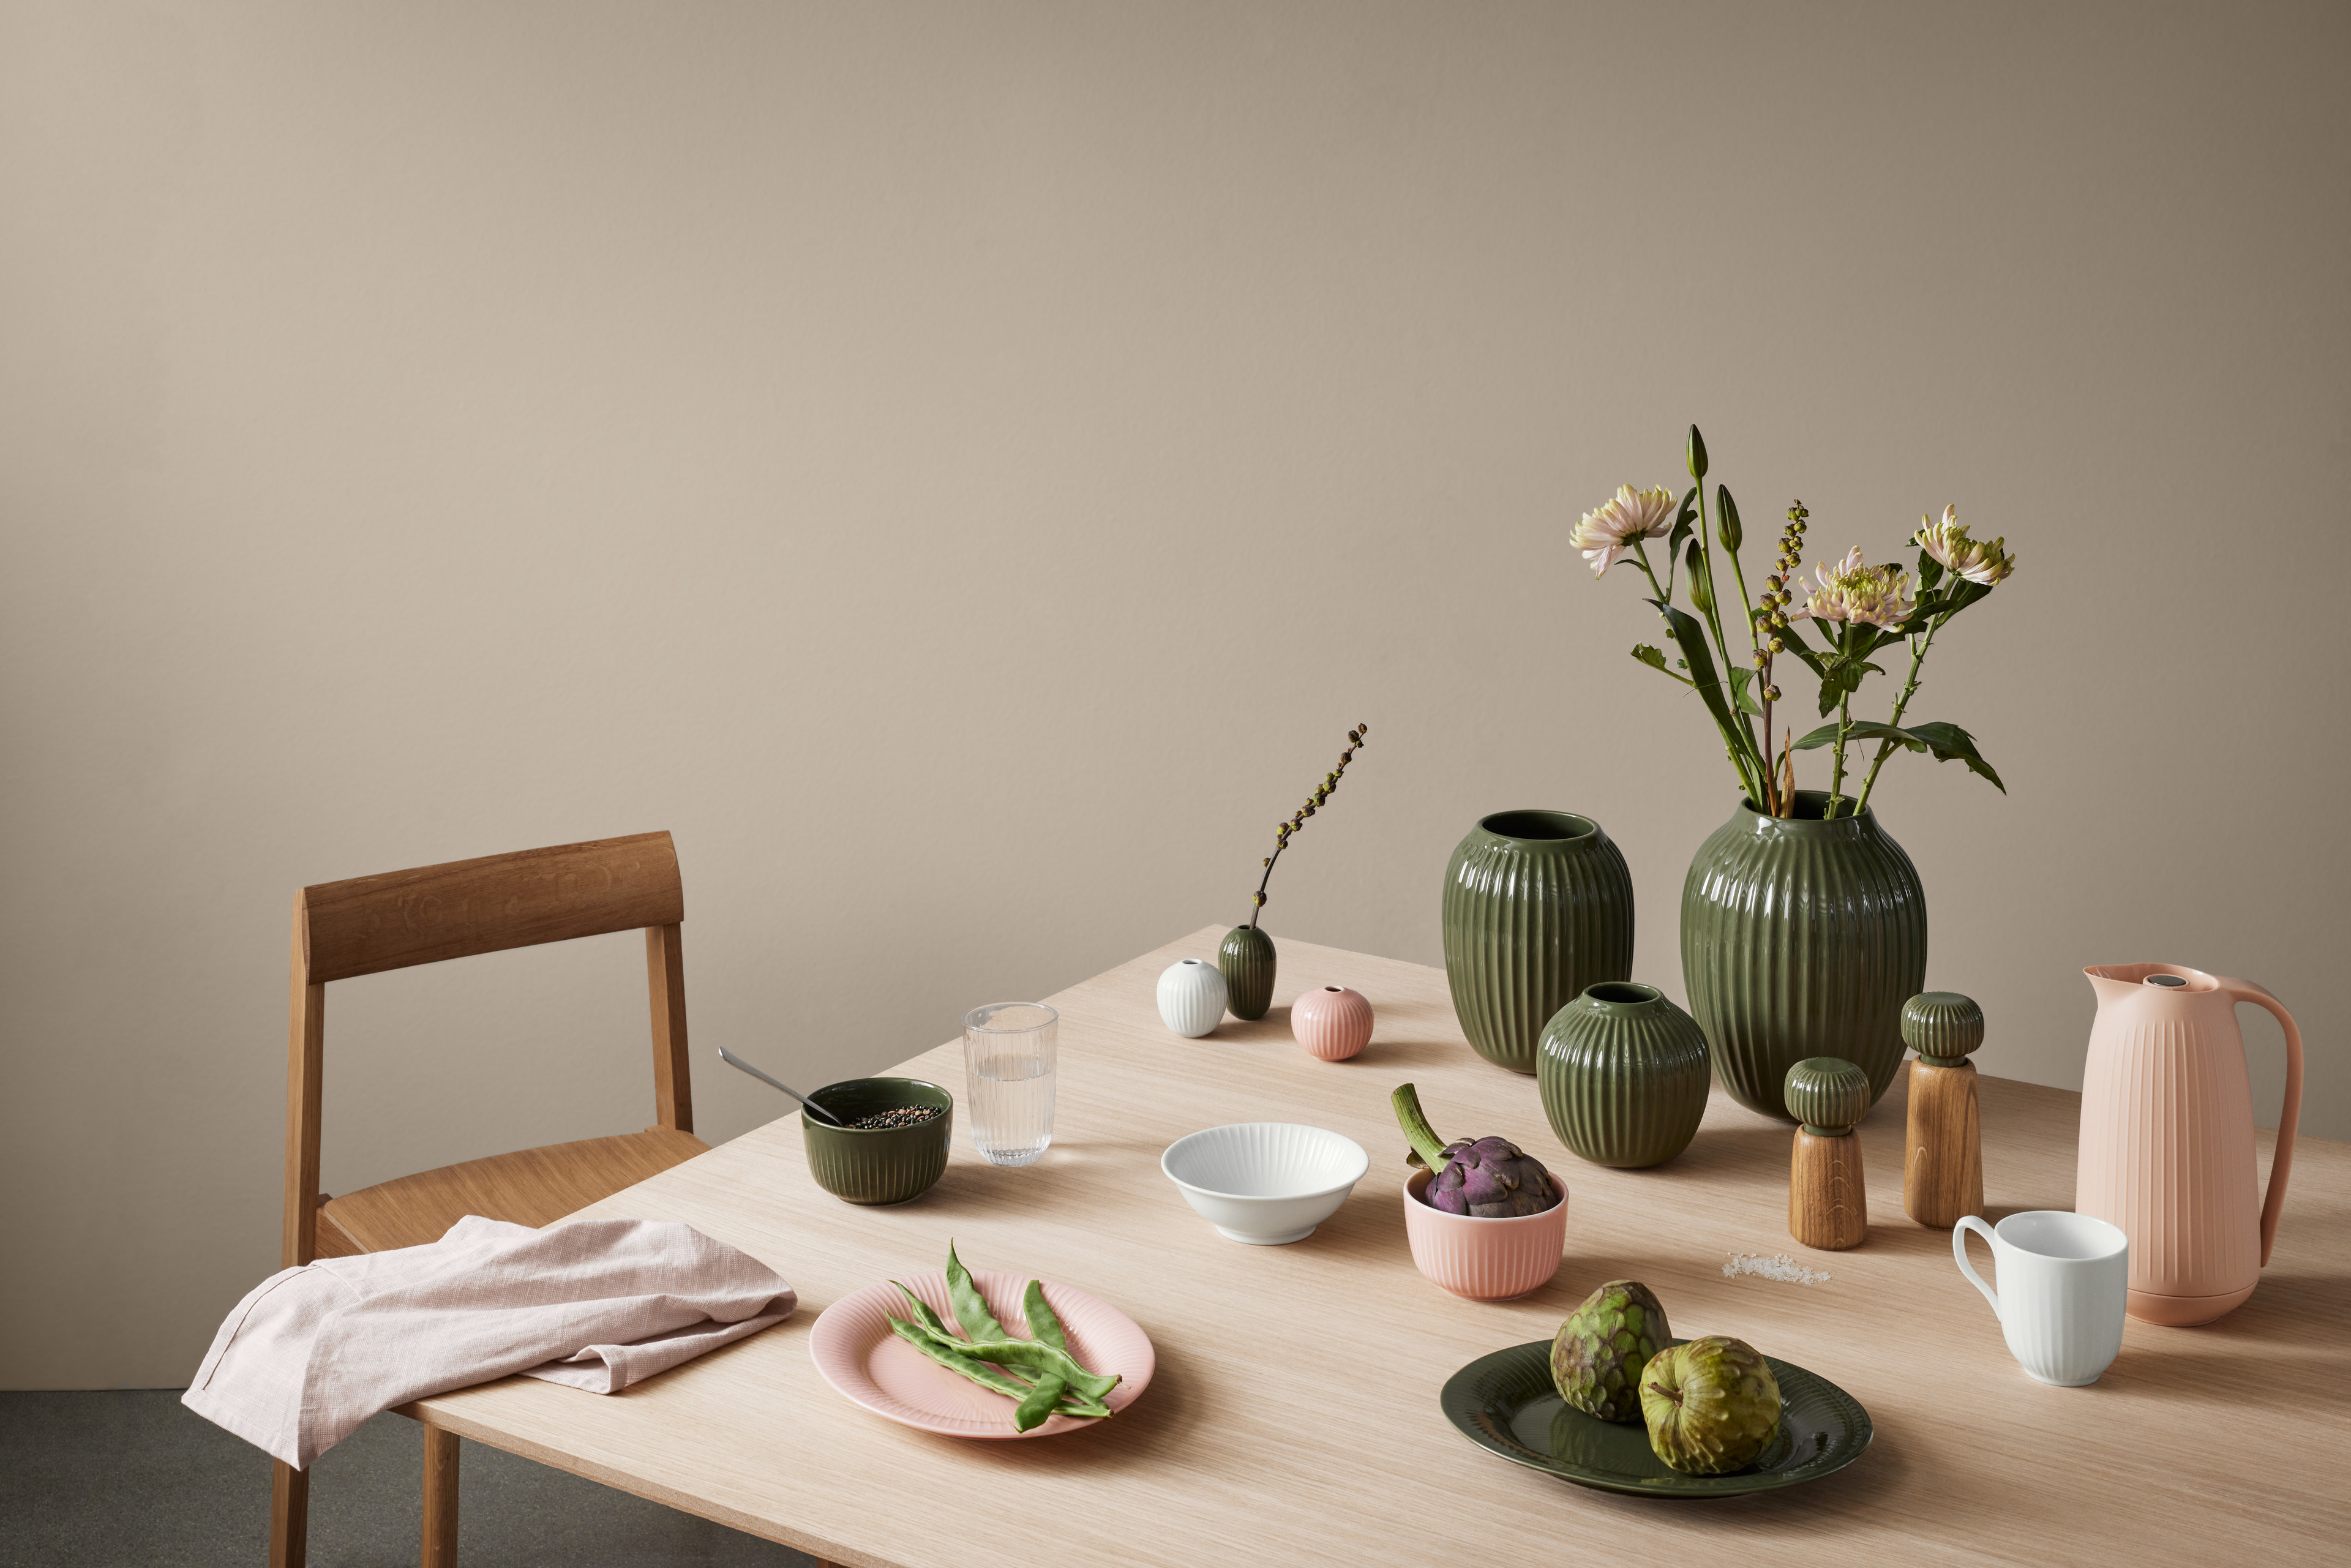 Vases, thermos, salt and pepper sets, bowls, plates and more from Kähler on table